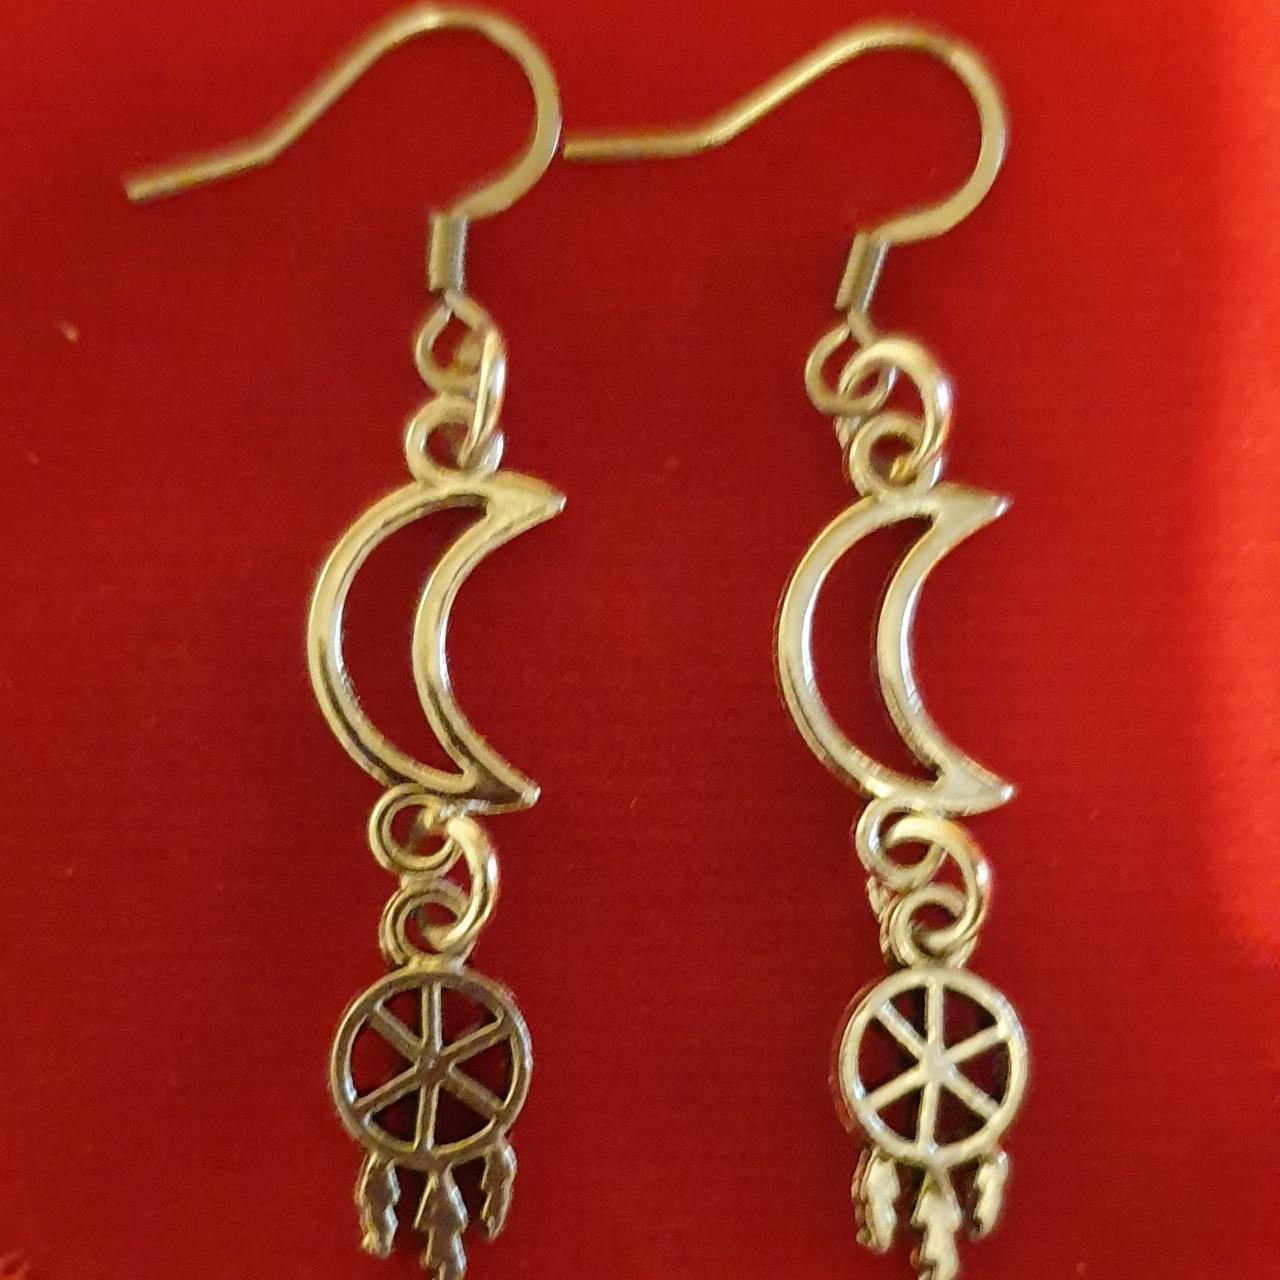 Product Image 1 - Earrings
Moon and Dream catcher or
Moon